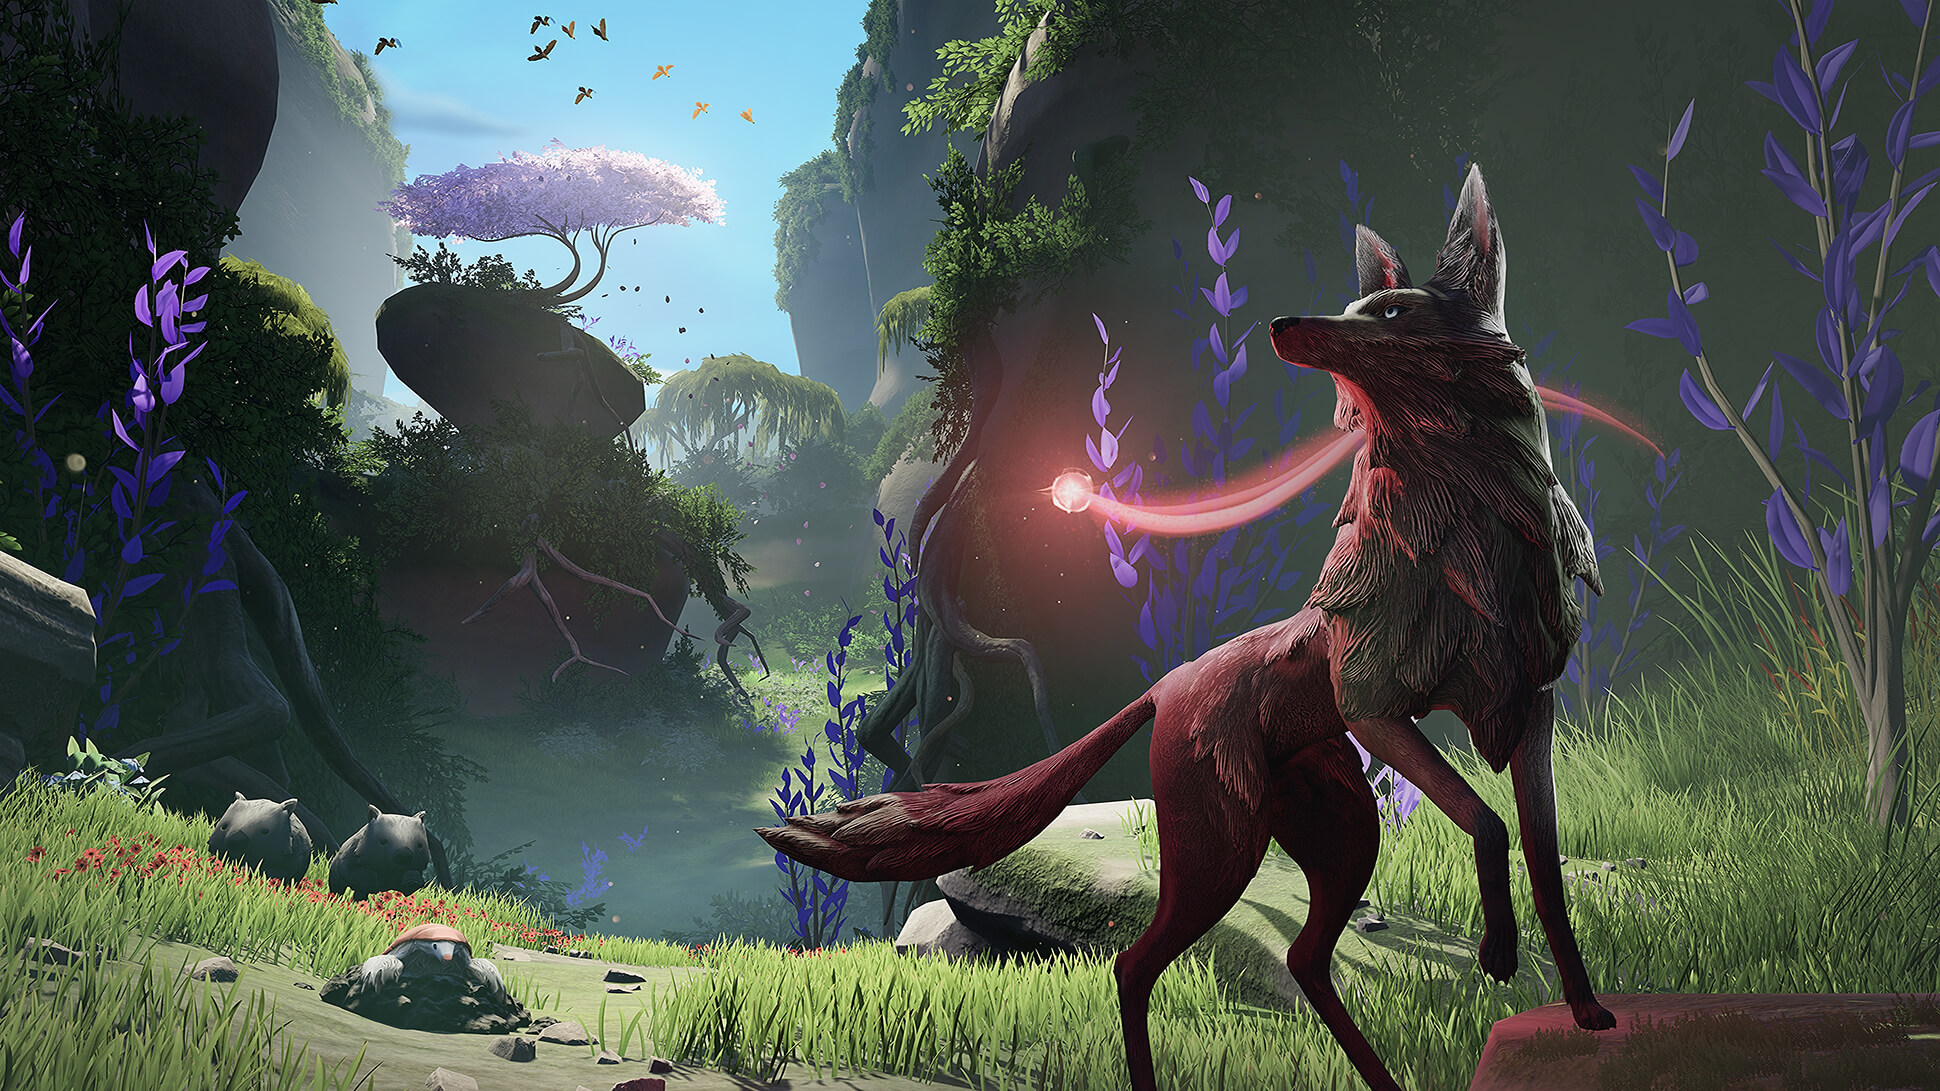 Lost Ember - An animal exploration adventure game for PC, PlayStation 4,  and Xbox One.